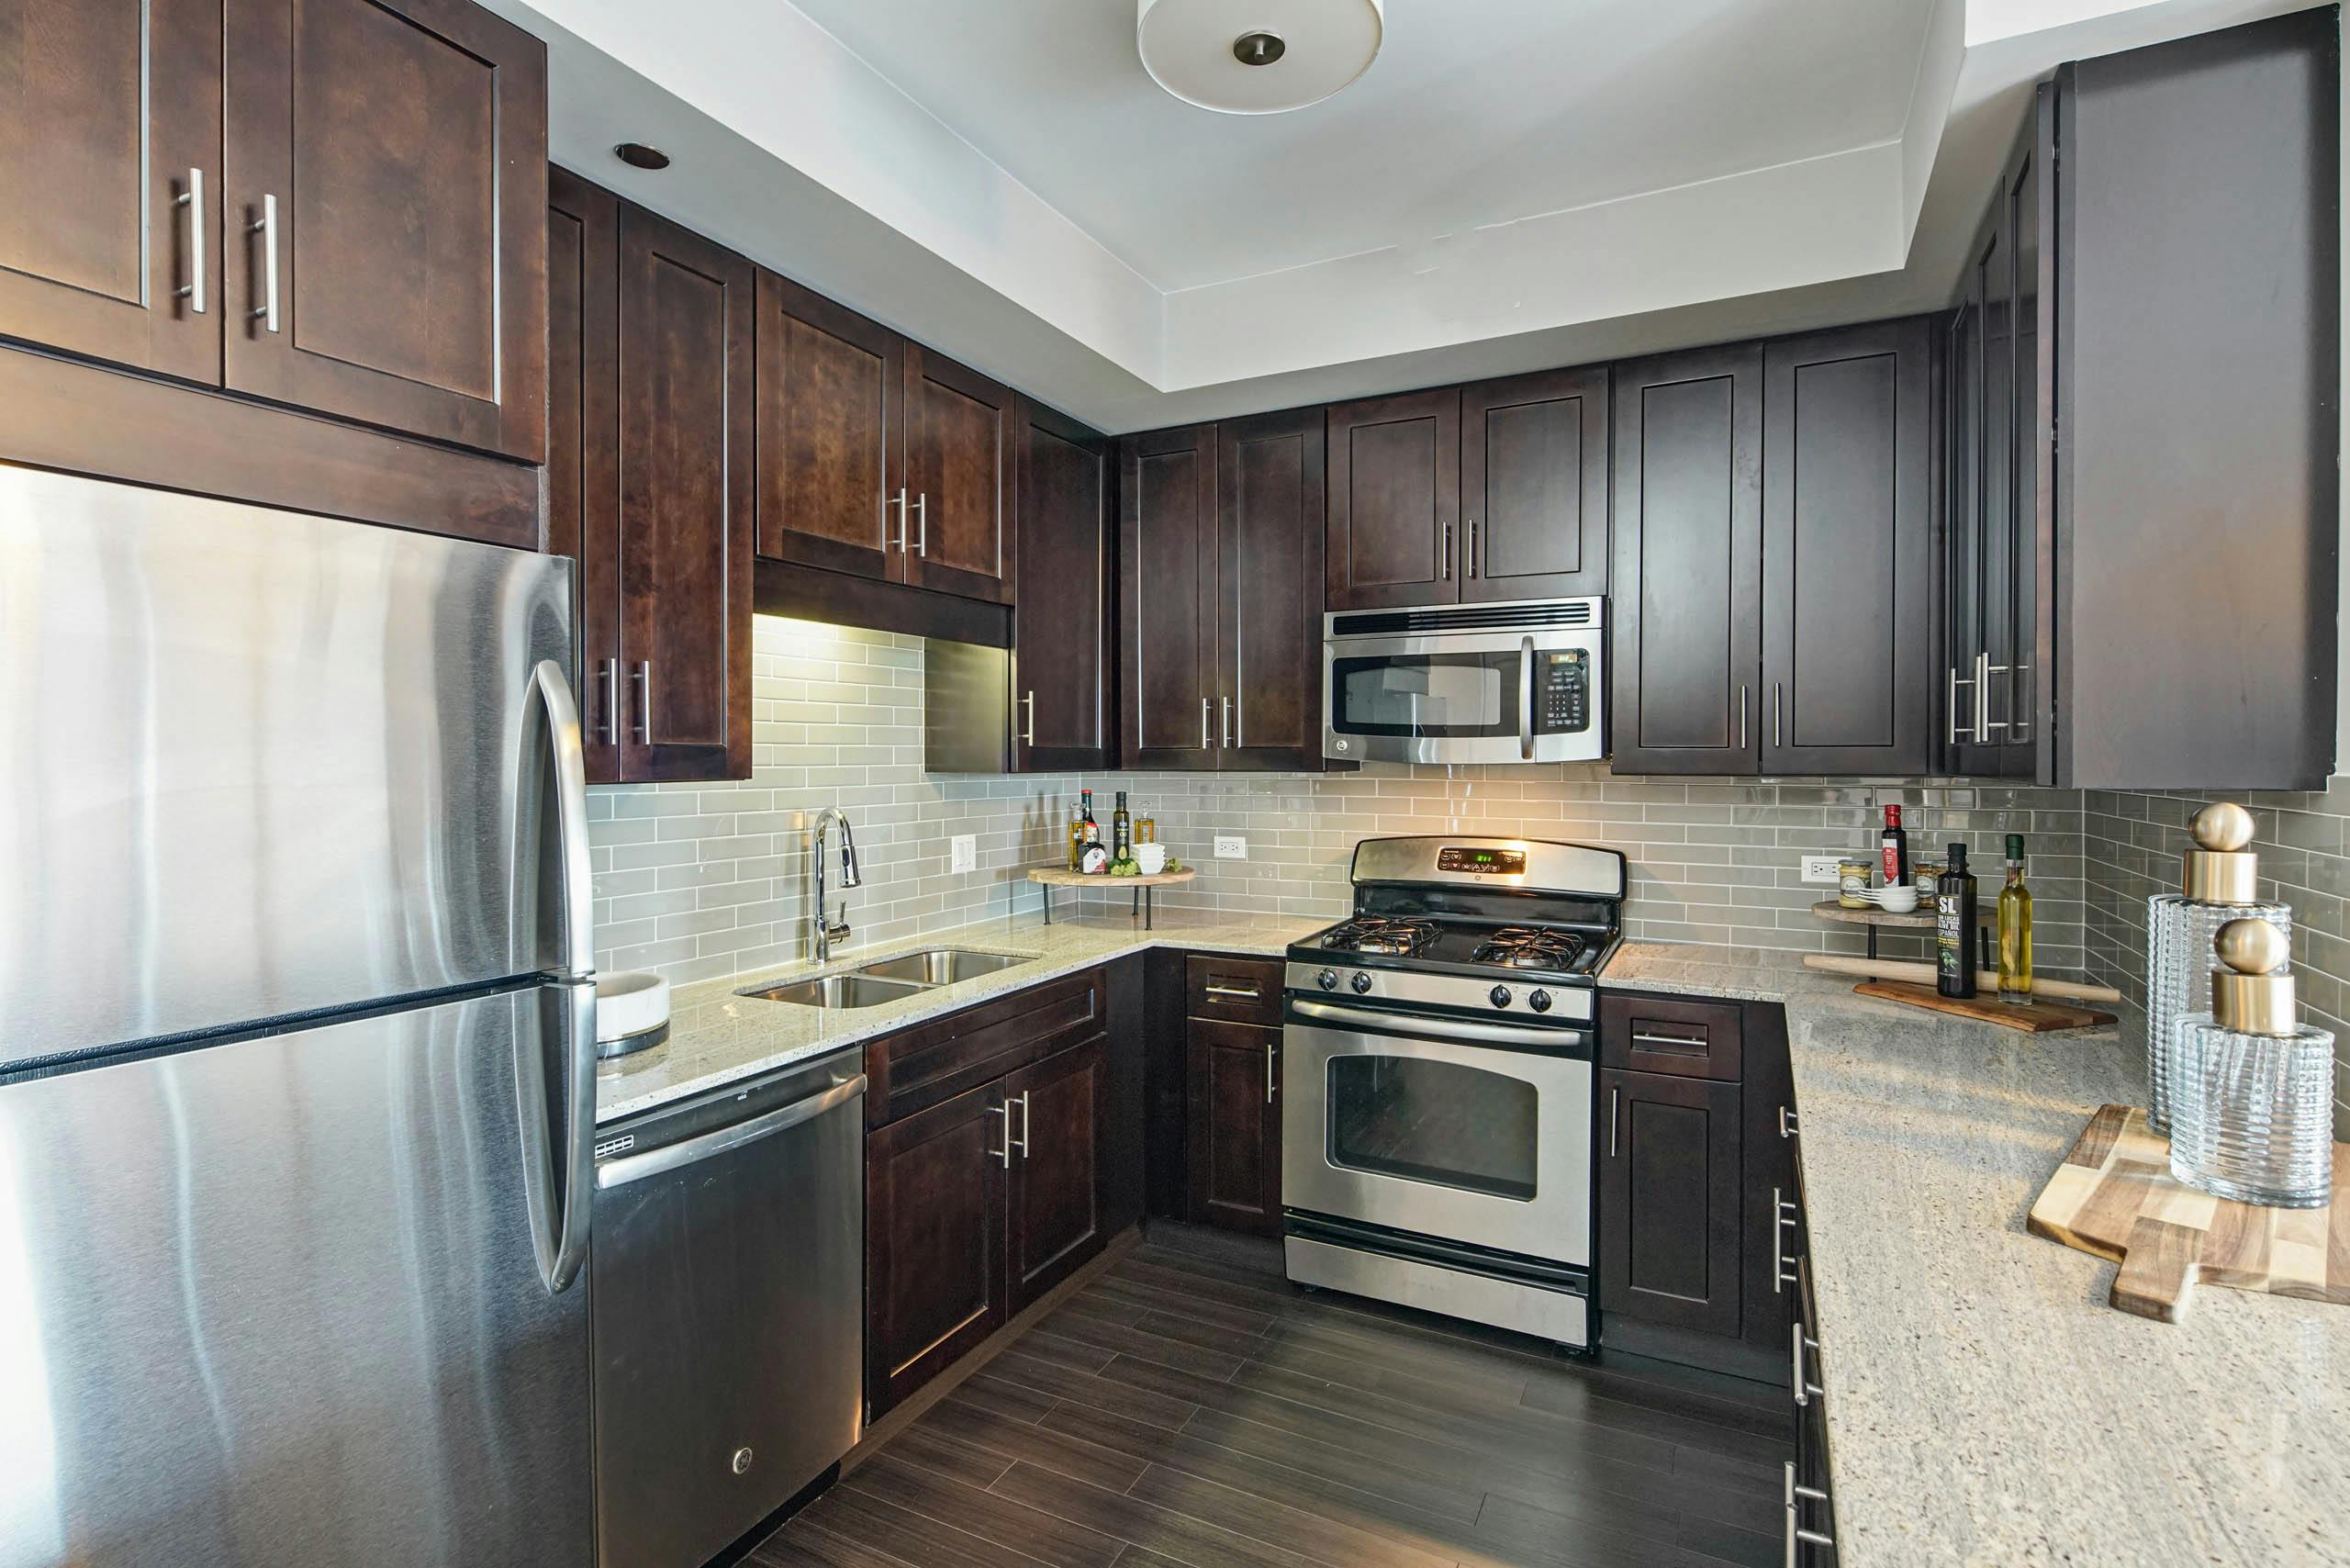 AMLI River North apartment kitchen with dark wood cabinets and granite countertops featuring stainless steel appliances